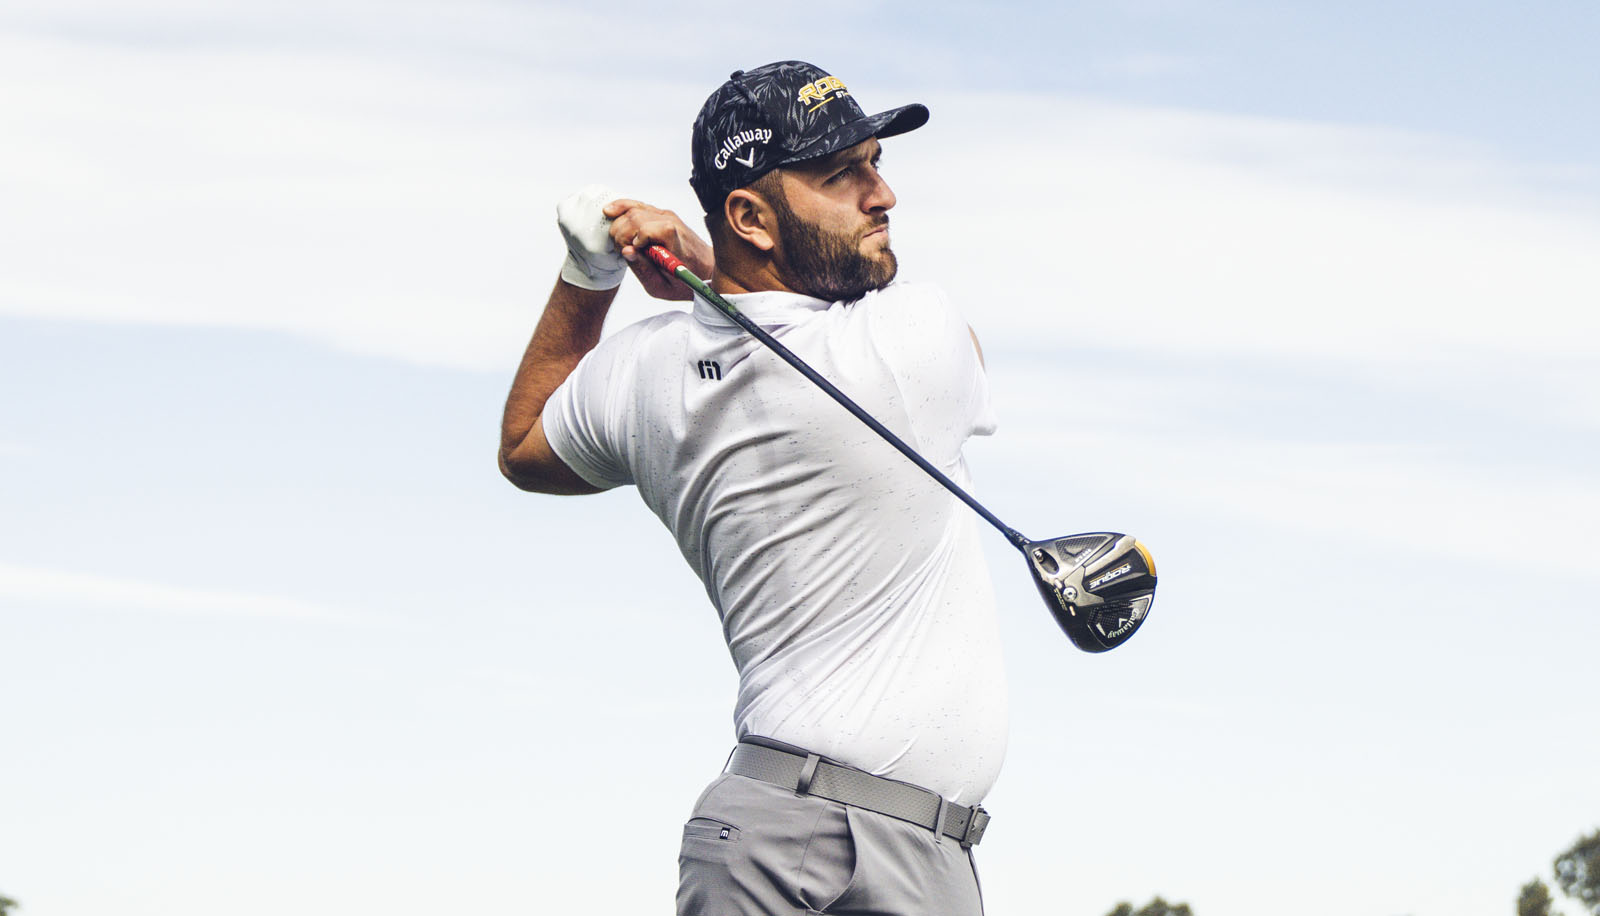 Rahm’s Gear + Driver Count Wins